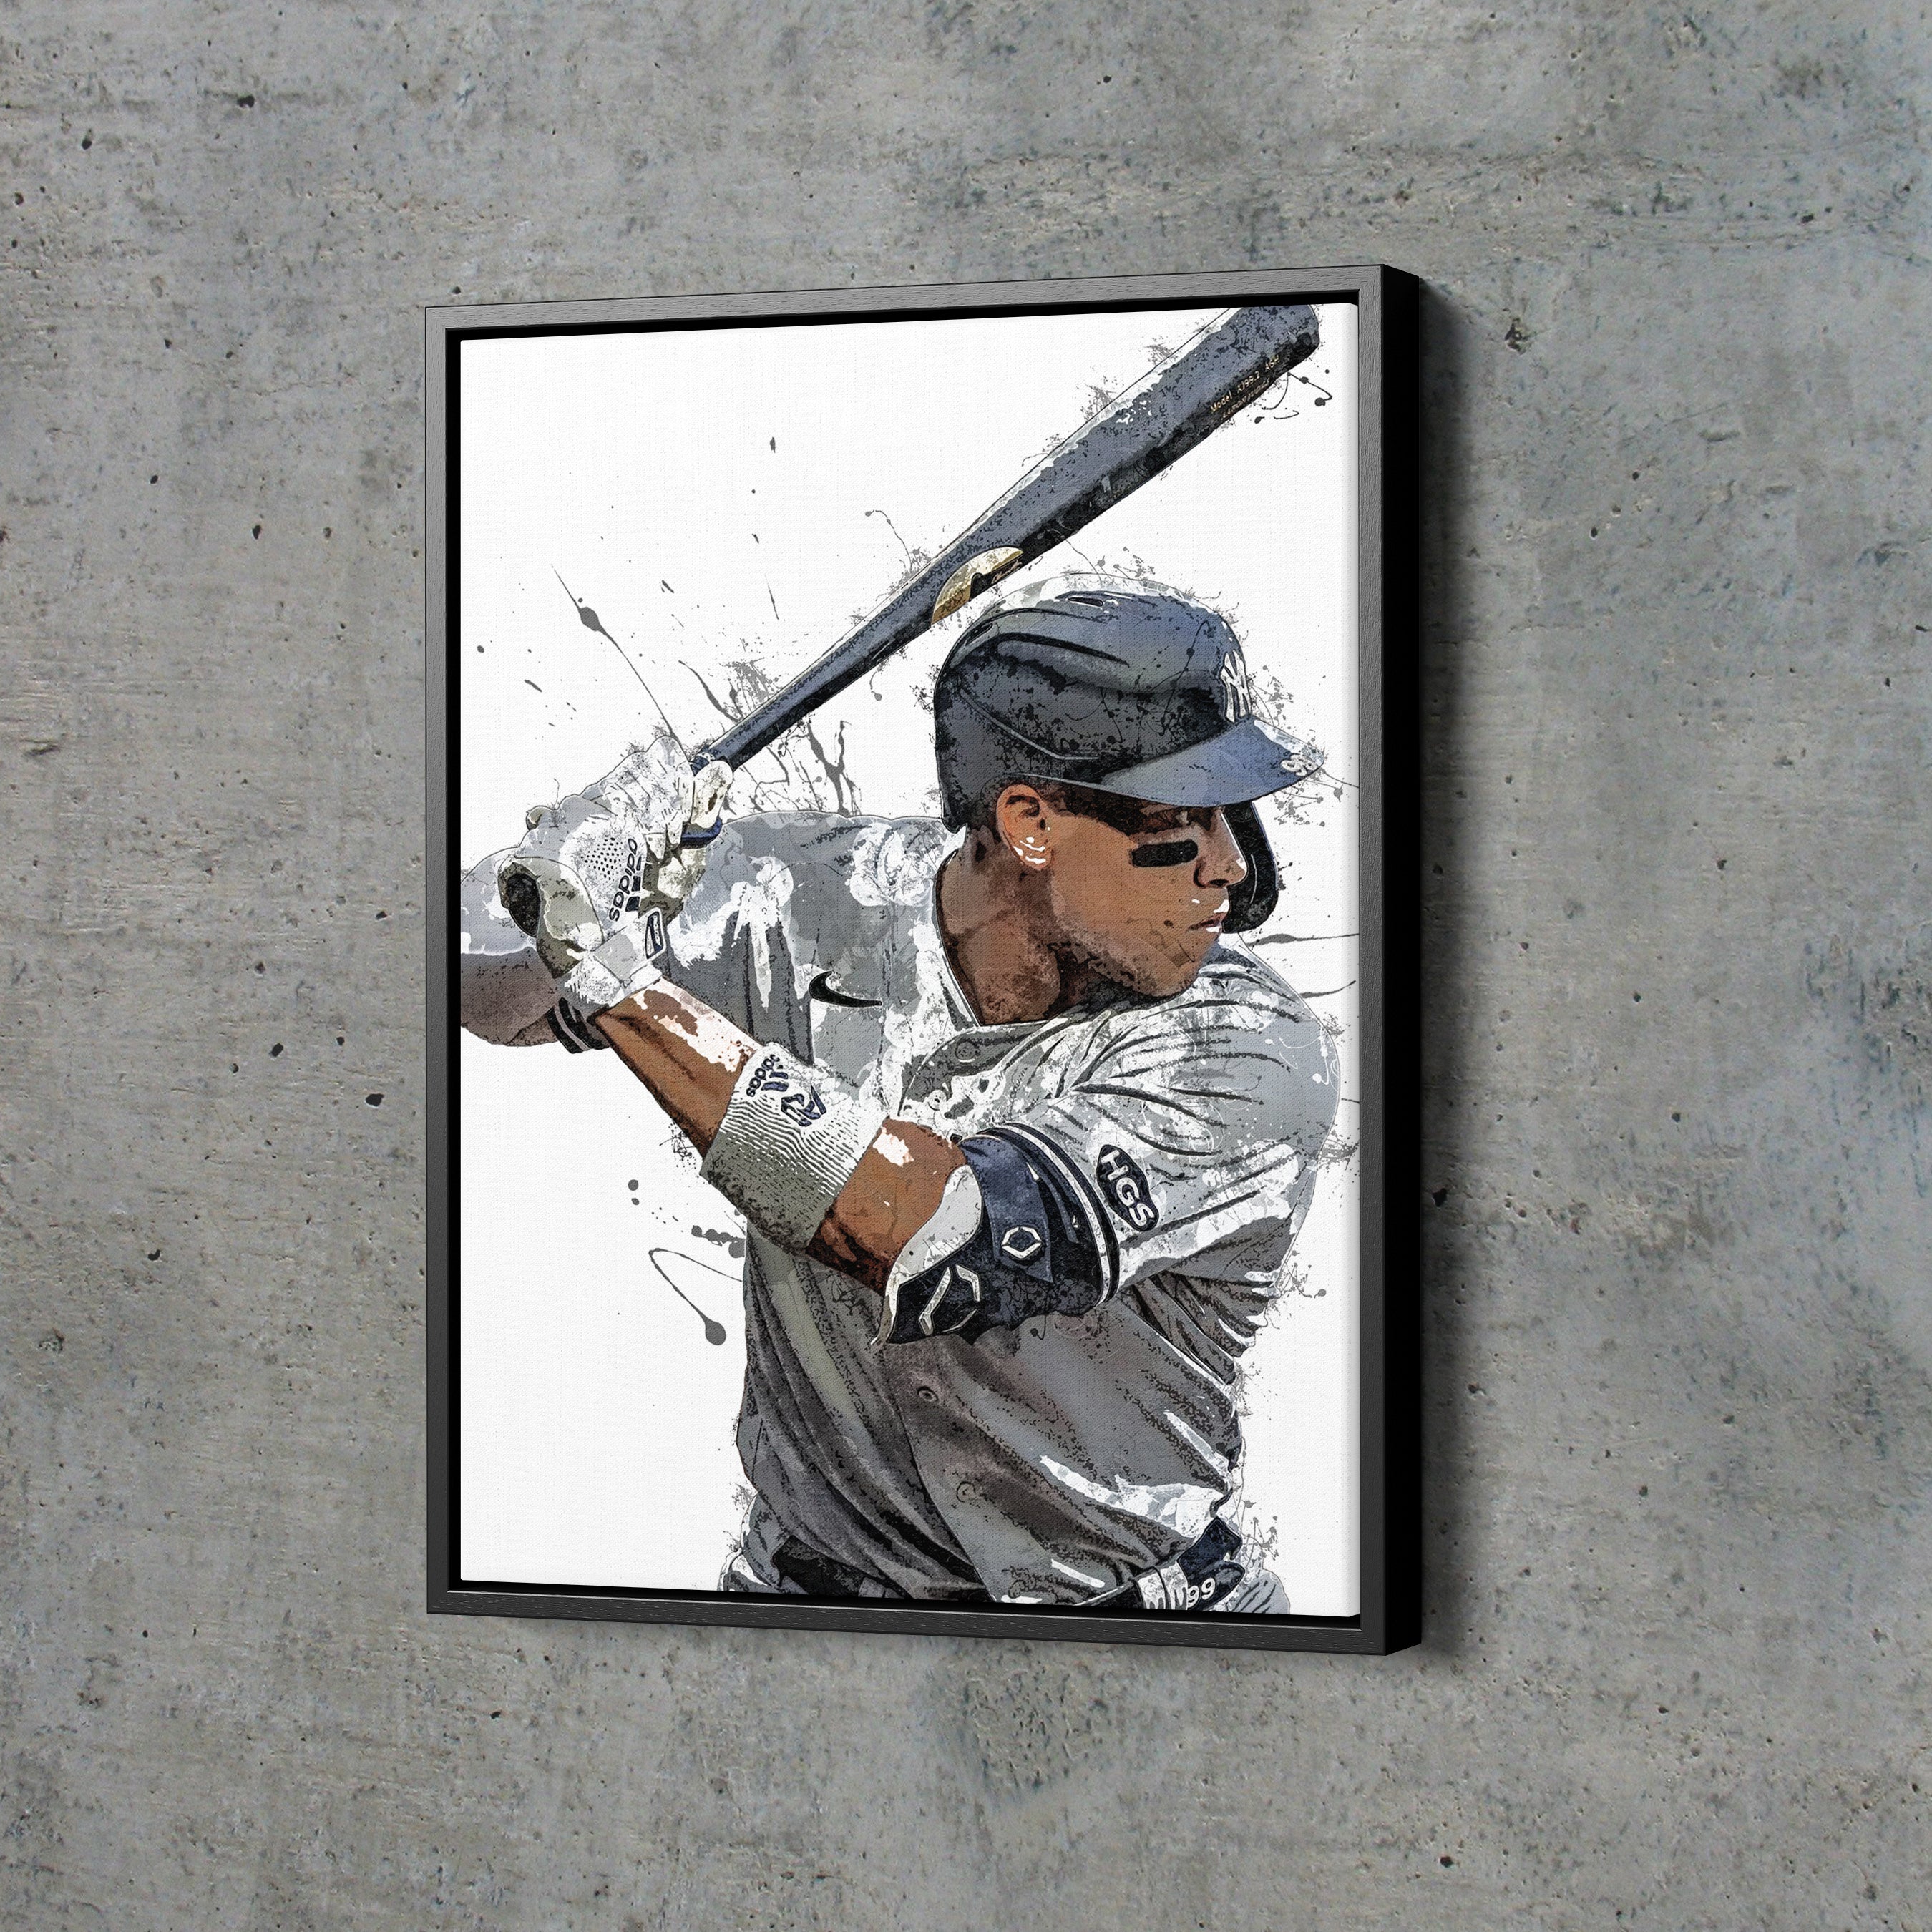  Aaron Judge Baseball Player Poster 21 Canvas Poster Wall Art  Picture Prints Hanging Photo Gift Idea Decor Home Posters Artworks  16x24inch(40x60cm): Posters & Prints